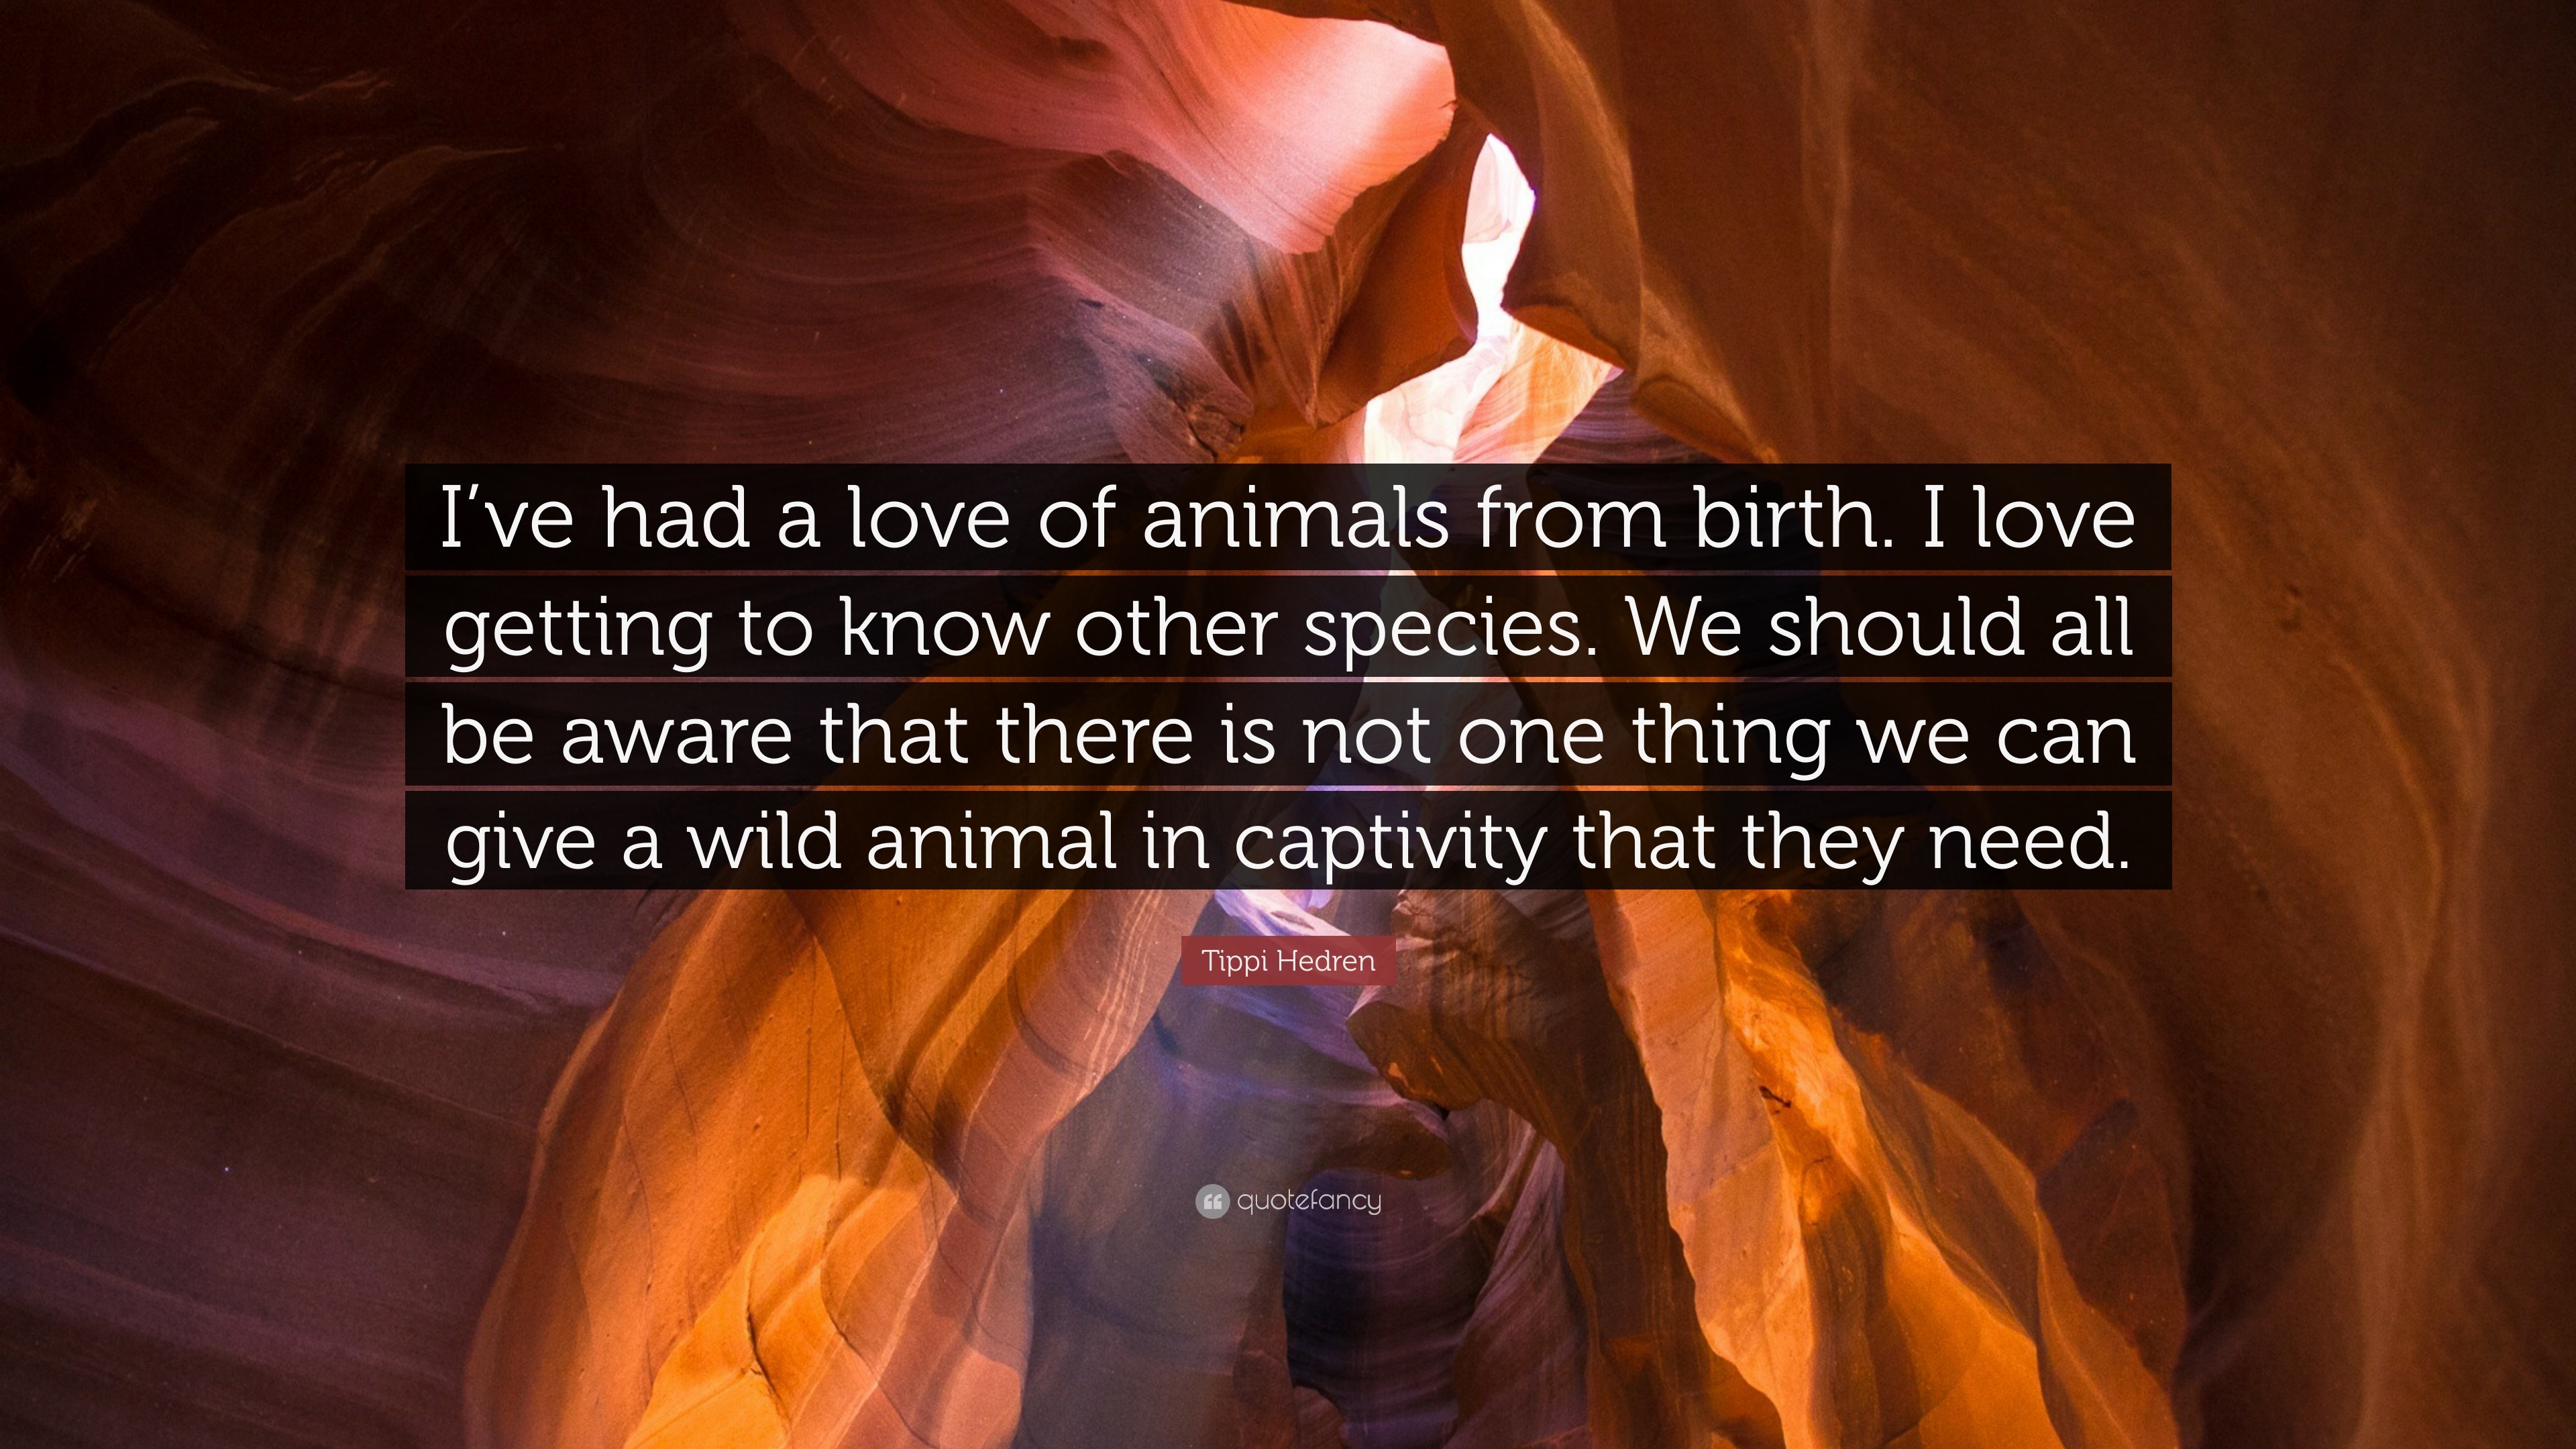 Tippi Hedren Quote: “I've had a love of animals from birth. I love getting  to know other species. We should all be aware that there is not on...”